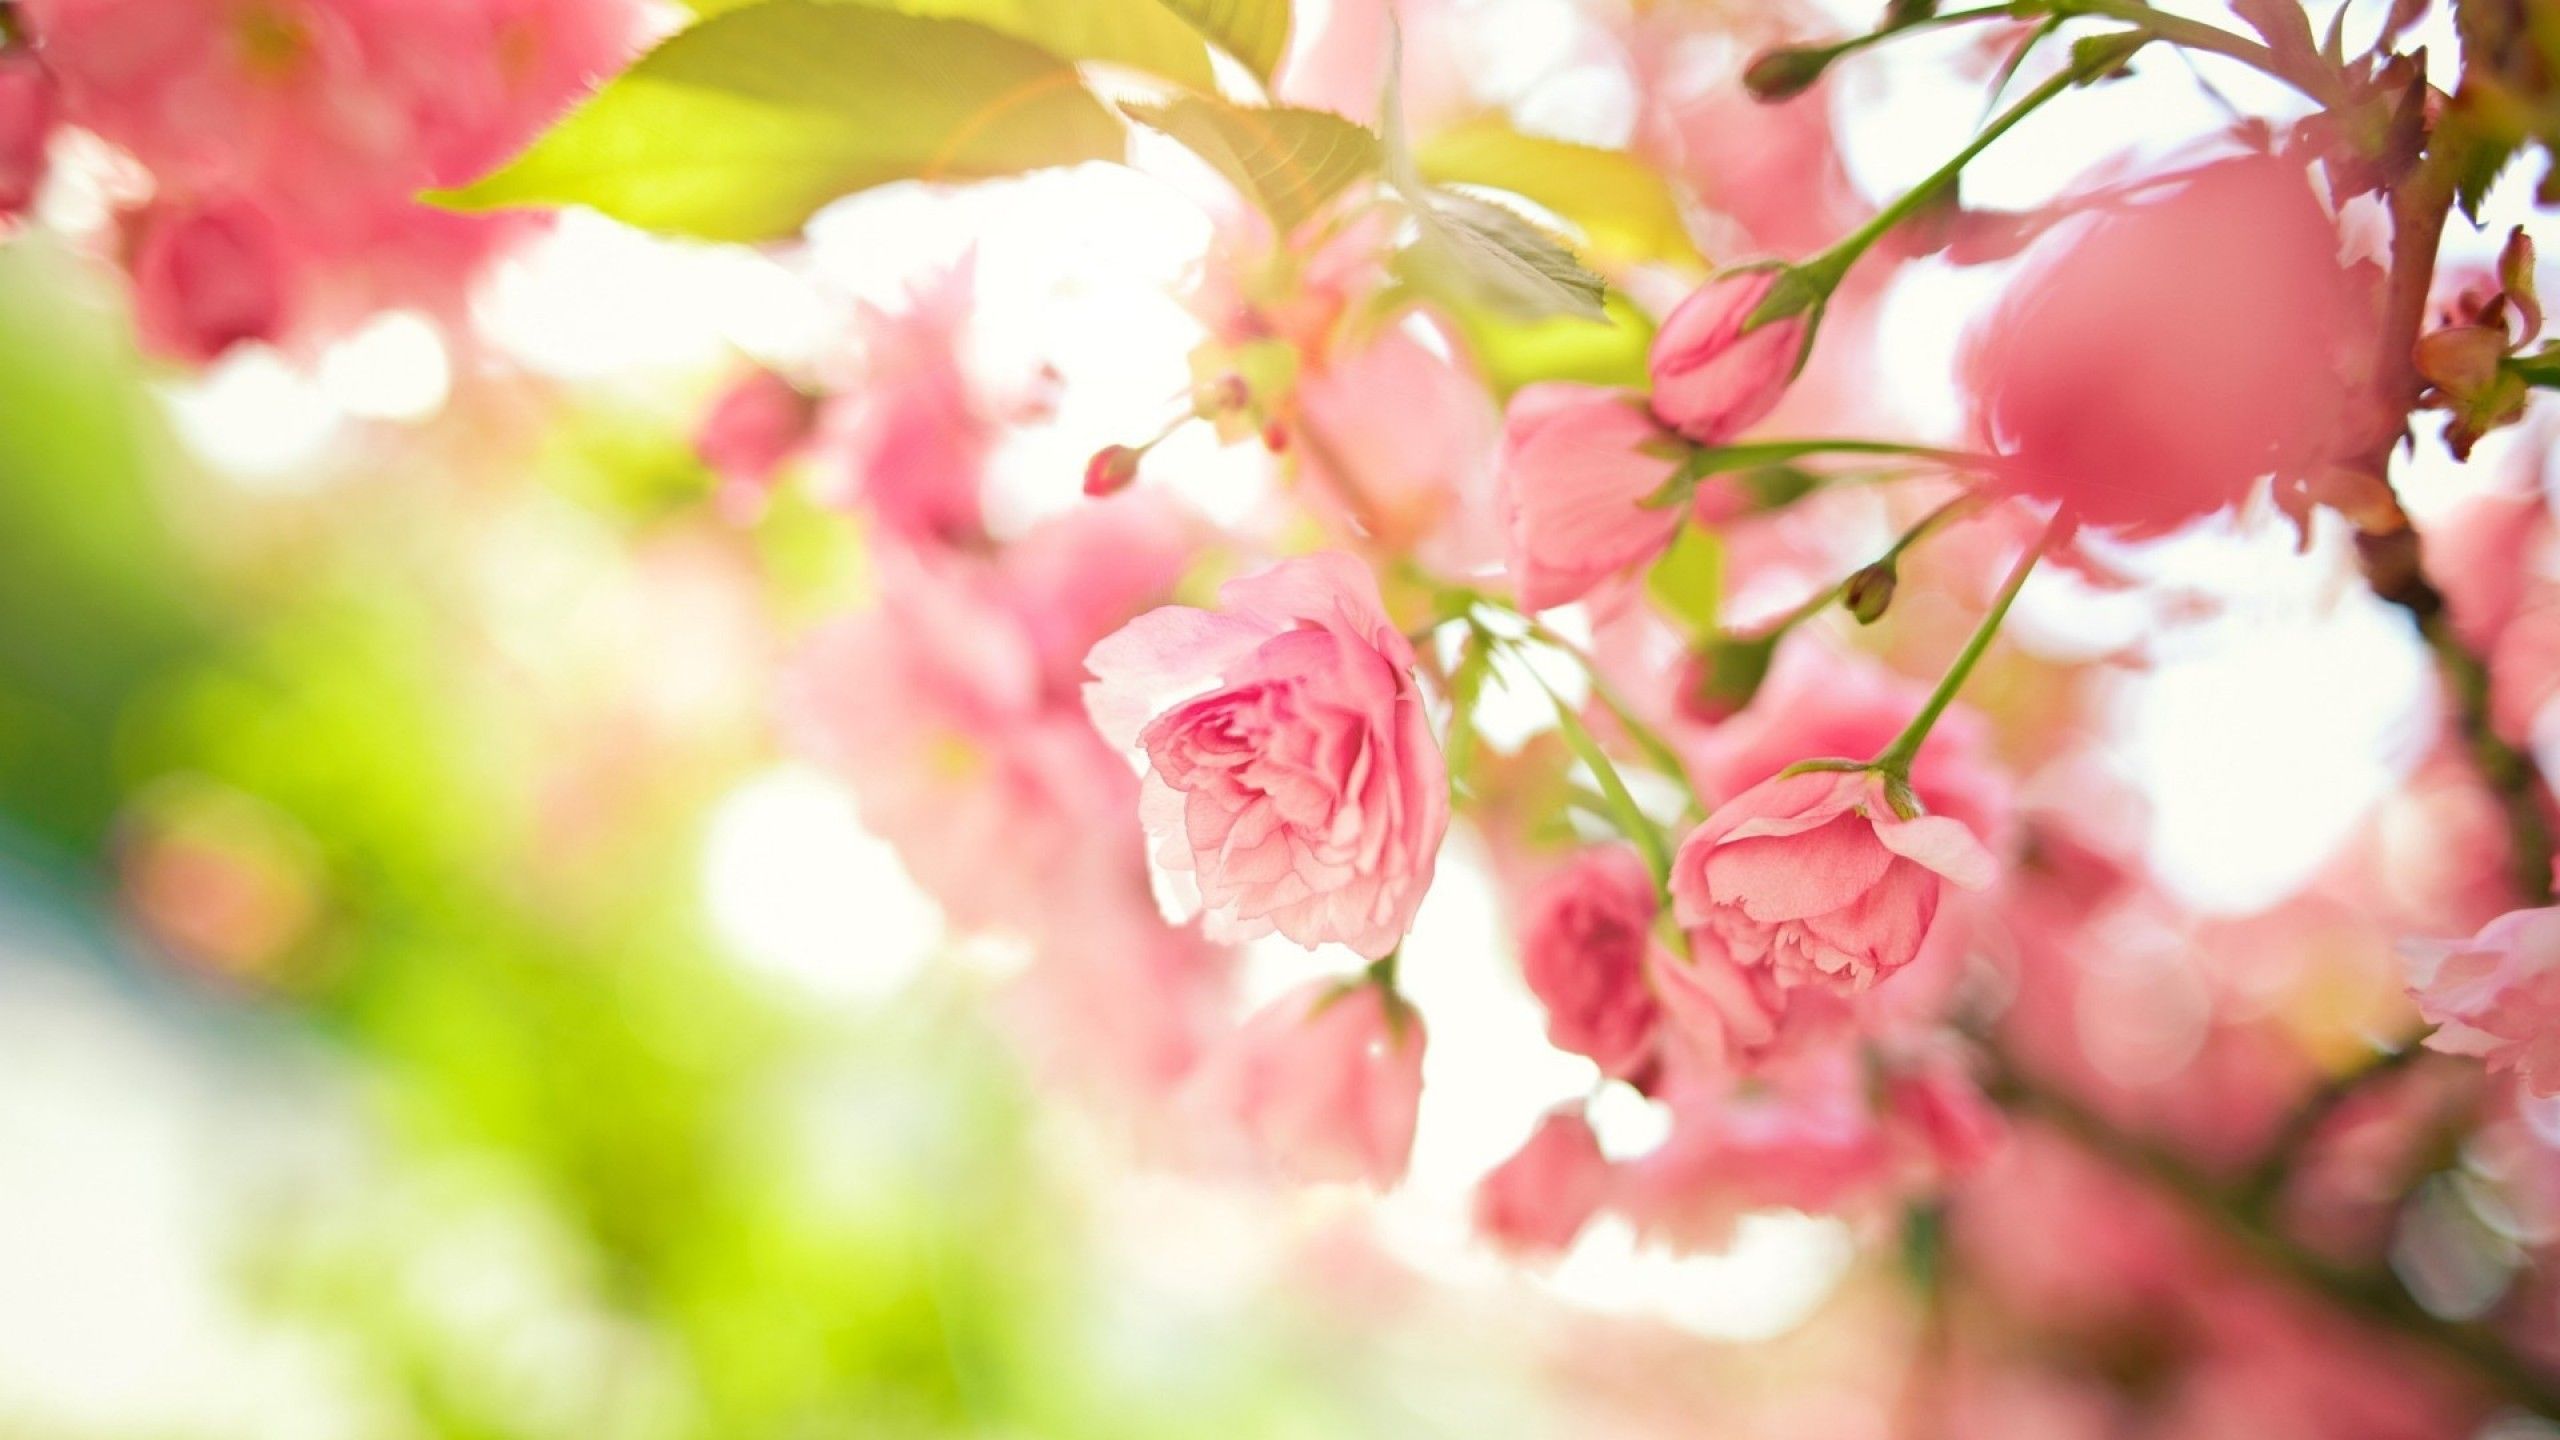 Pink spring flowers HD Wallpaper Youtube Cover Photo